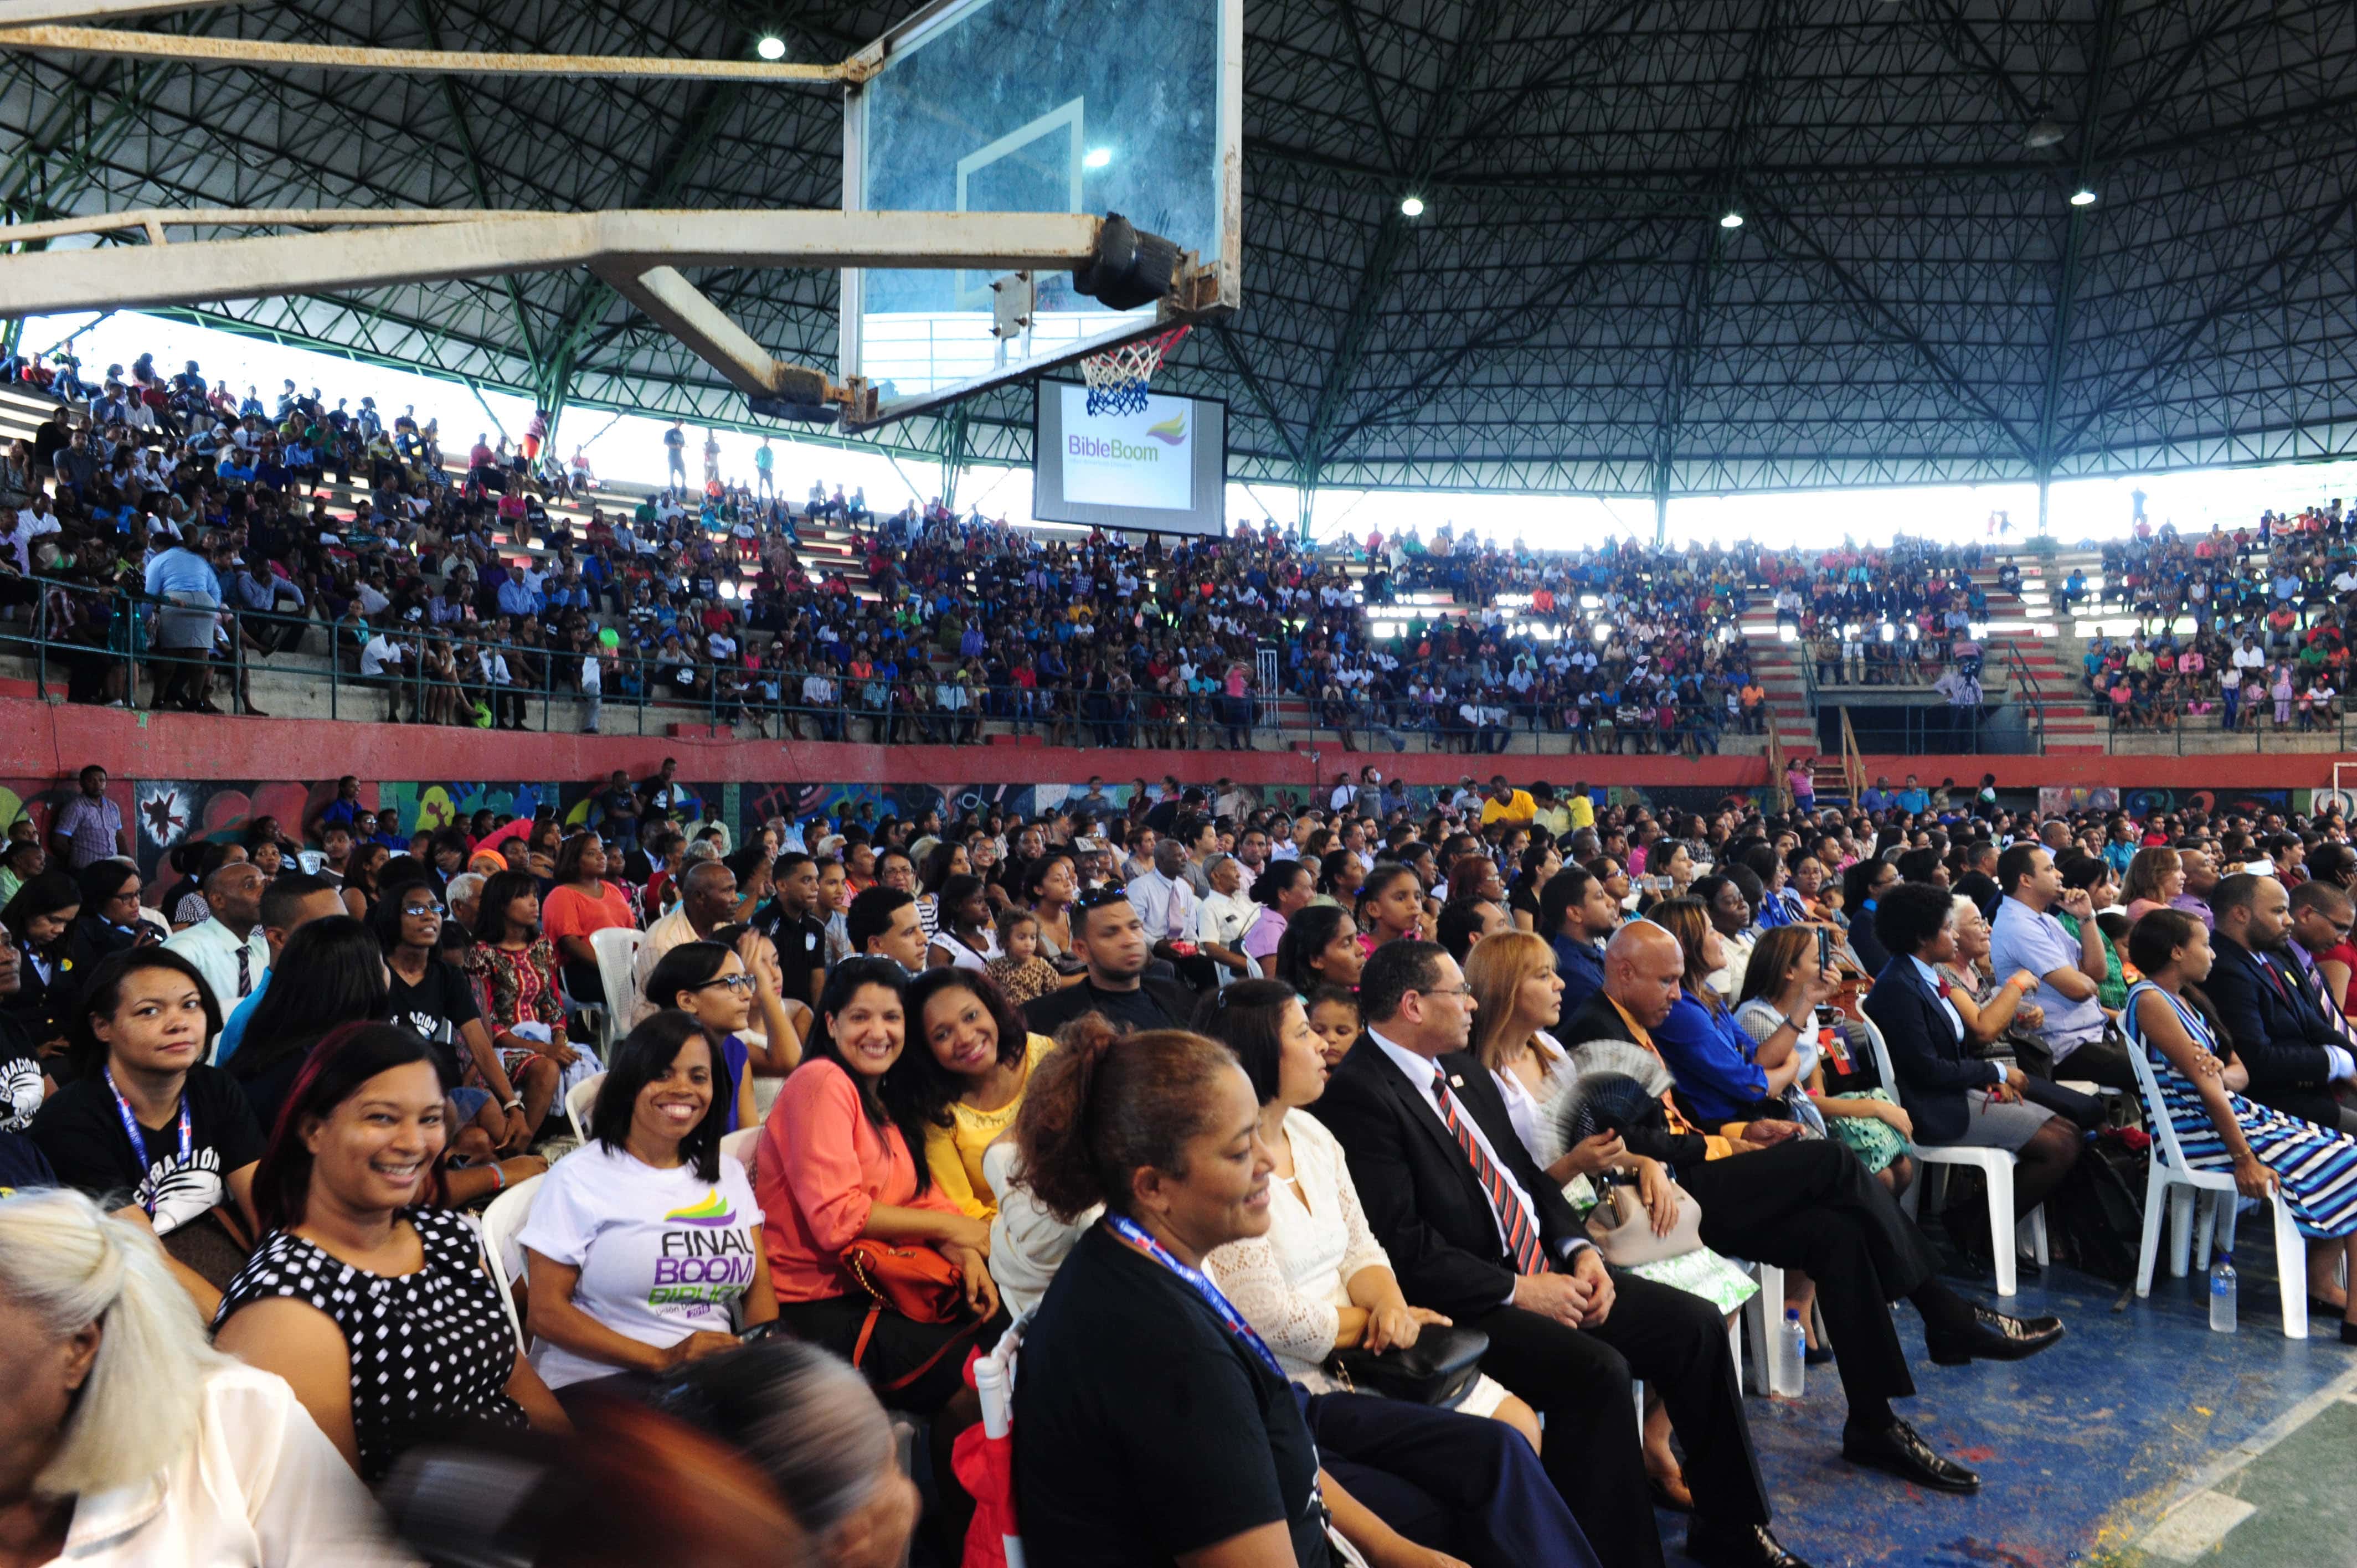 Nearly 3,000 church members from across the island witnessed the event at the Polideportivo Center in Universidad Central del Este, Dec. 10, 2016. (Libna Stevens/IAD)